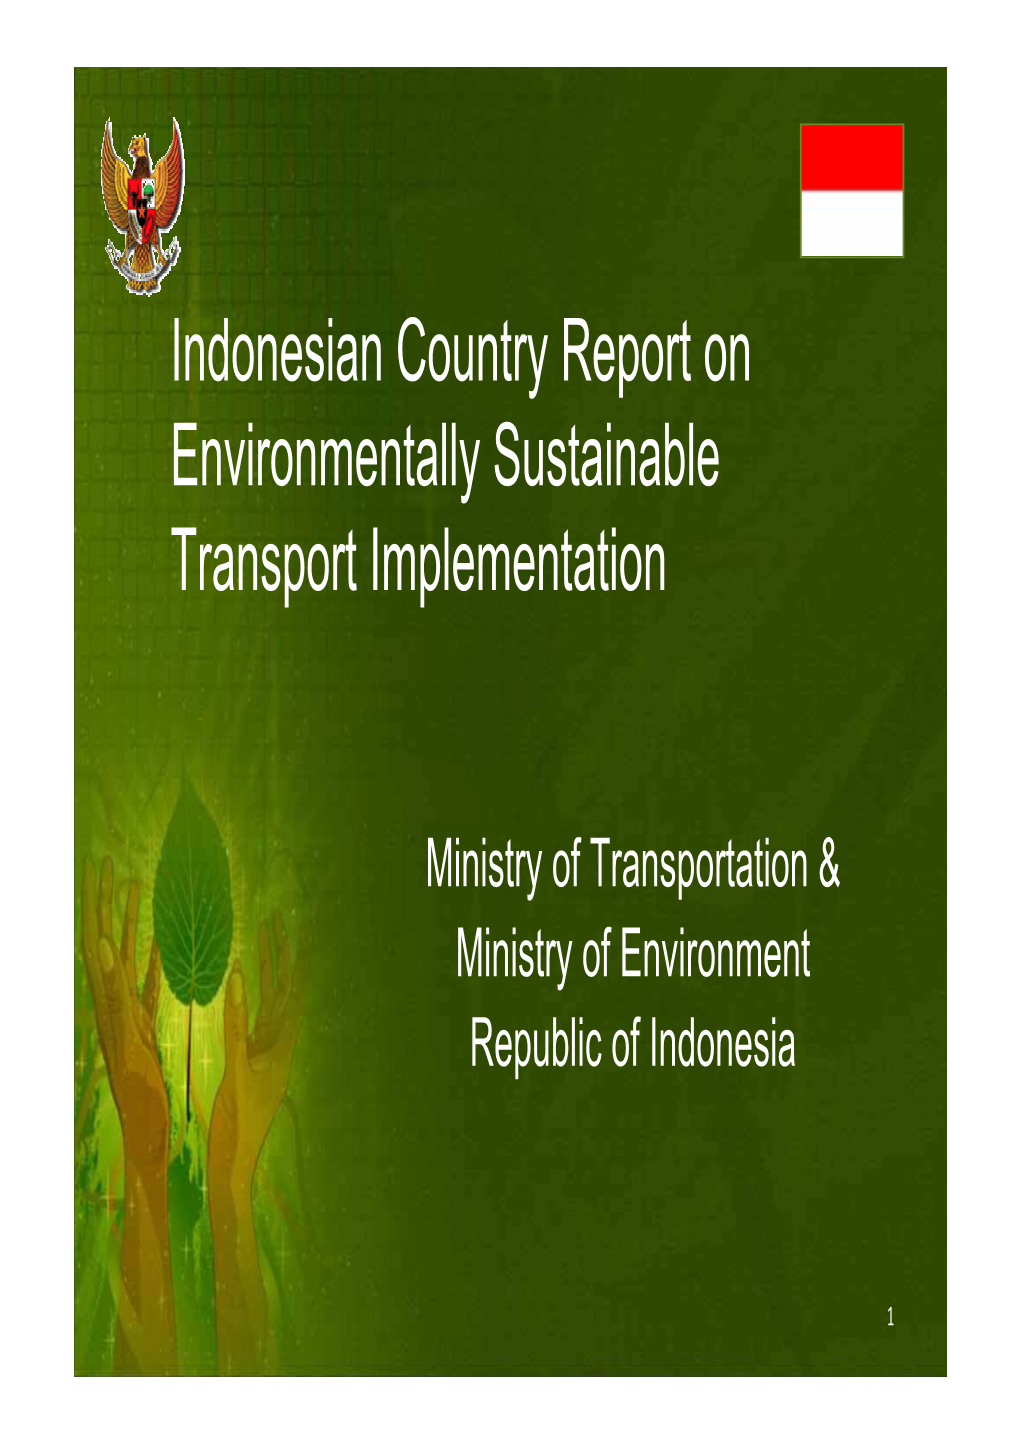 Indonesian Country Report on Environmentally Sustainable Transport Implementation